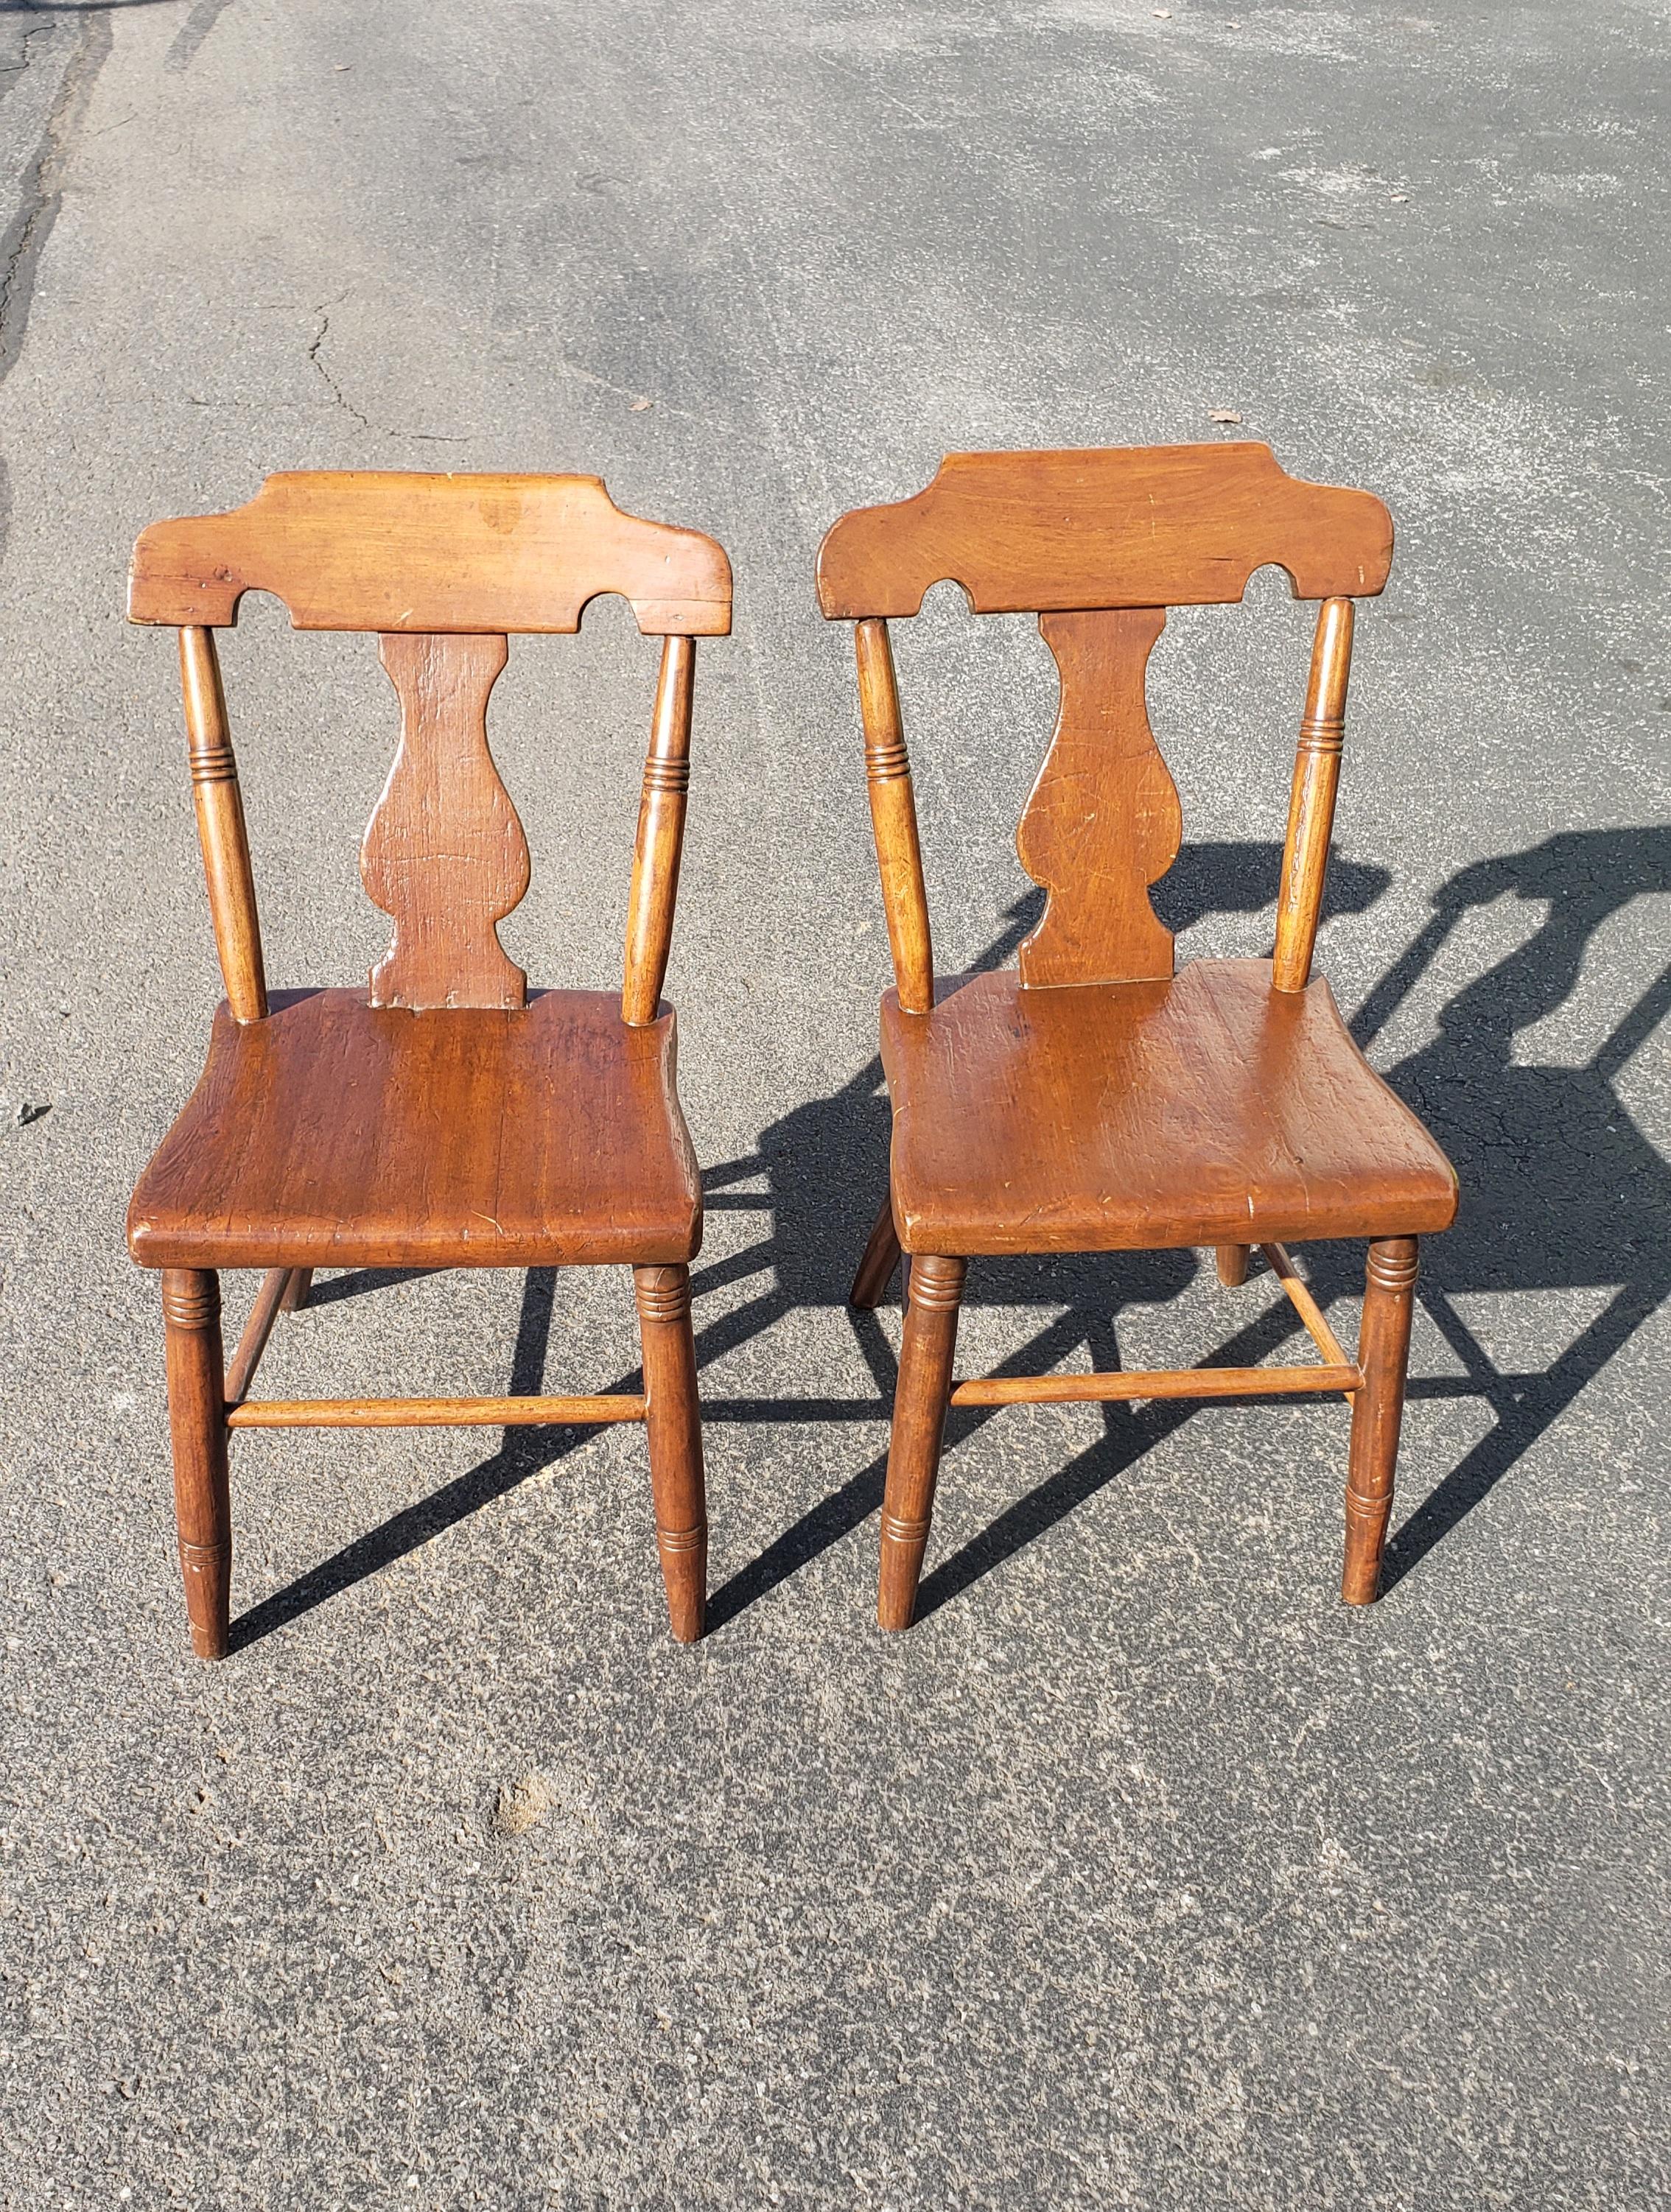 Set of 4 Early American Yew Wood Side Chairs, circa 1840s In Good Condition For Sale In Germantown, MD